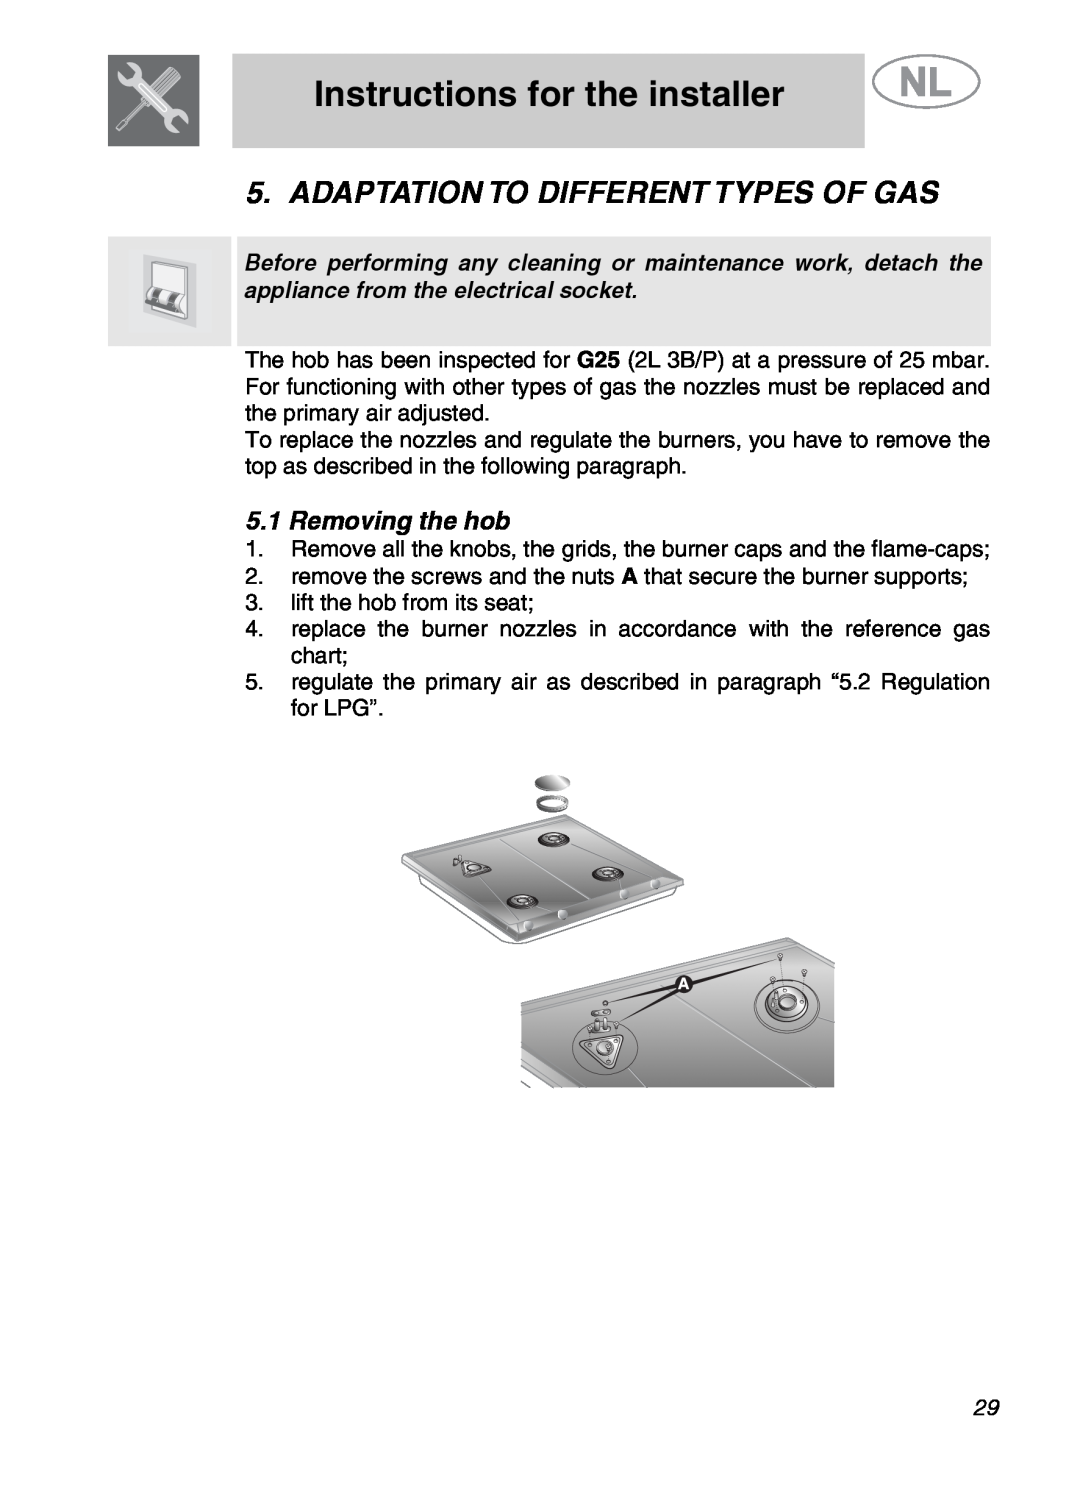 Smeg GKC641-3 manual Adaptation To Different Types Of Gas, Removing the hob, Instructions for the installer 